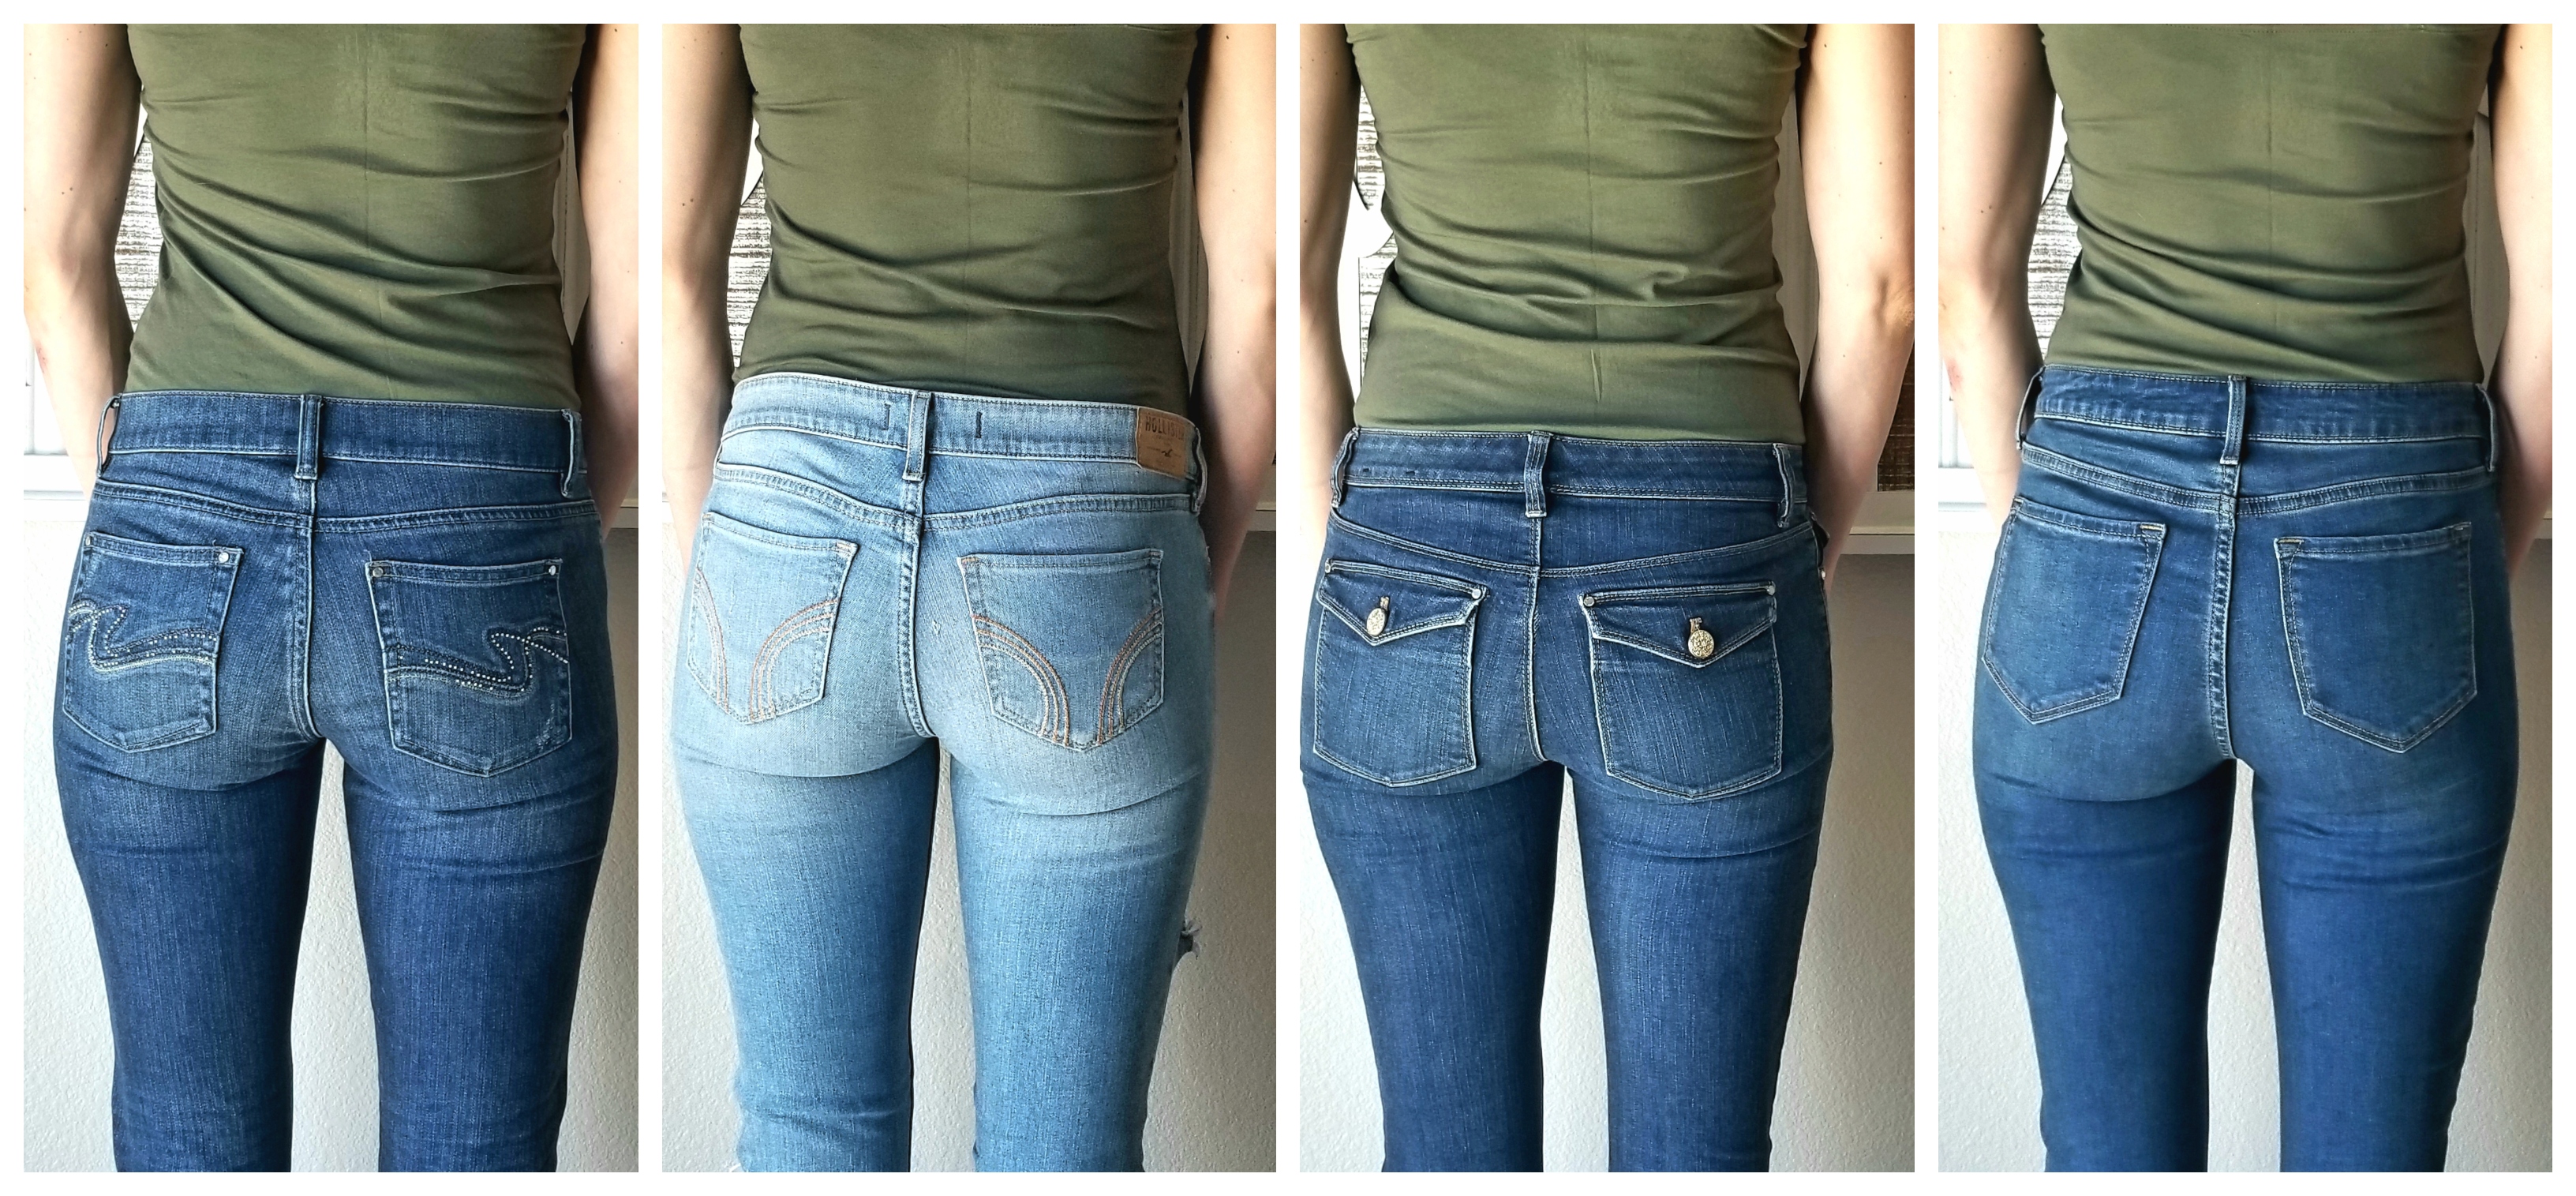 How to Find the Most Flattering Jeans for Your Booty – Darlin' Delilah